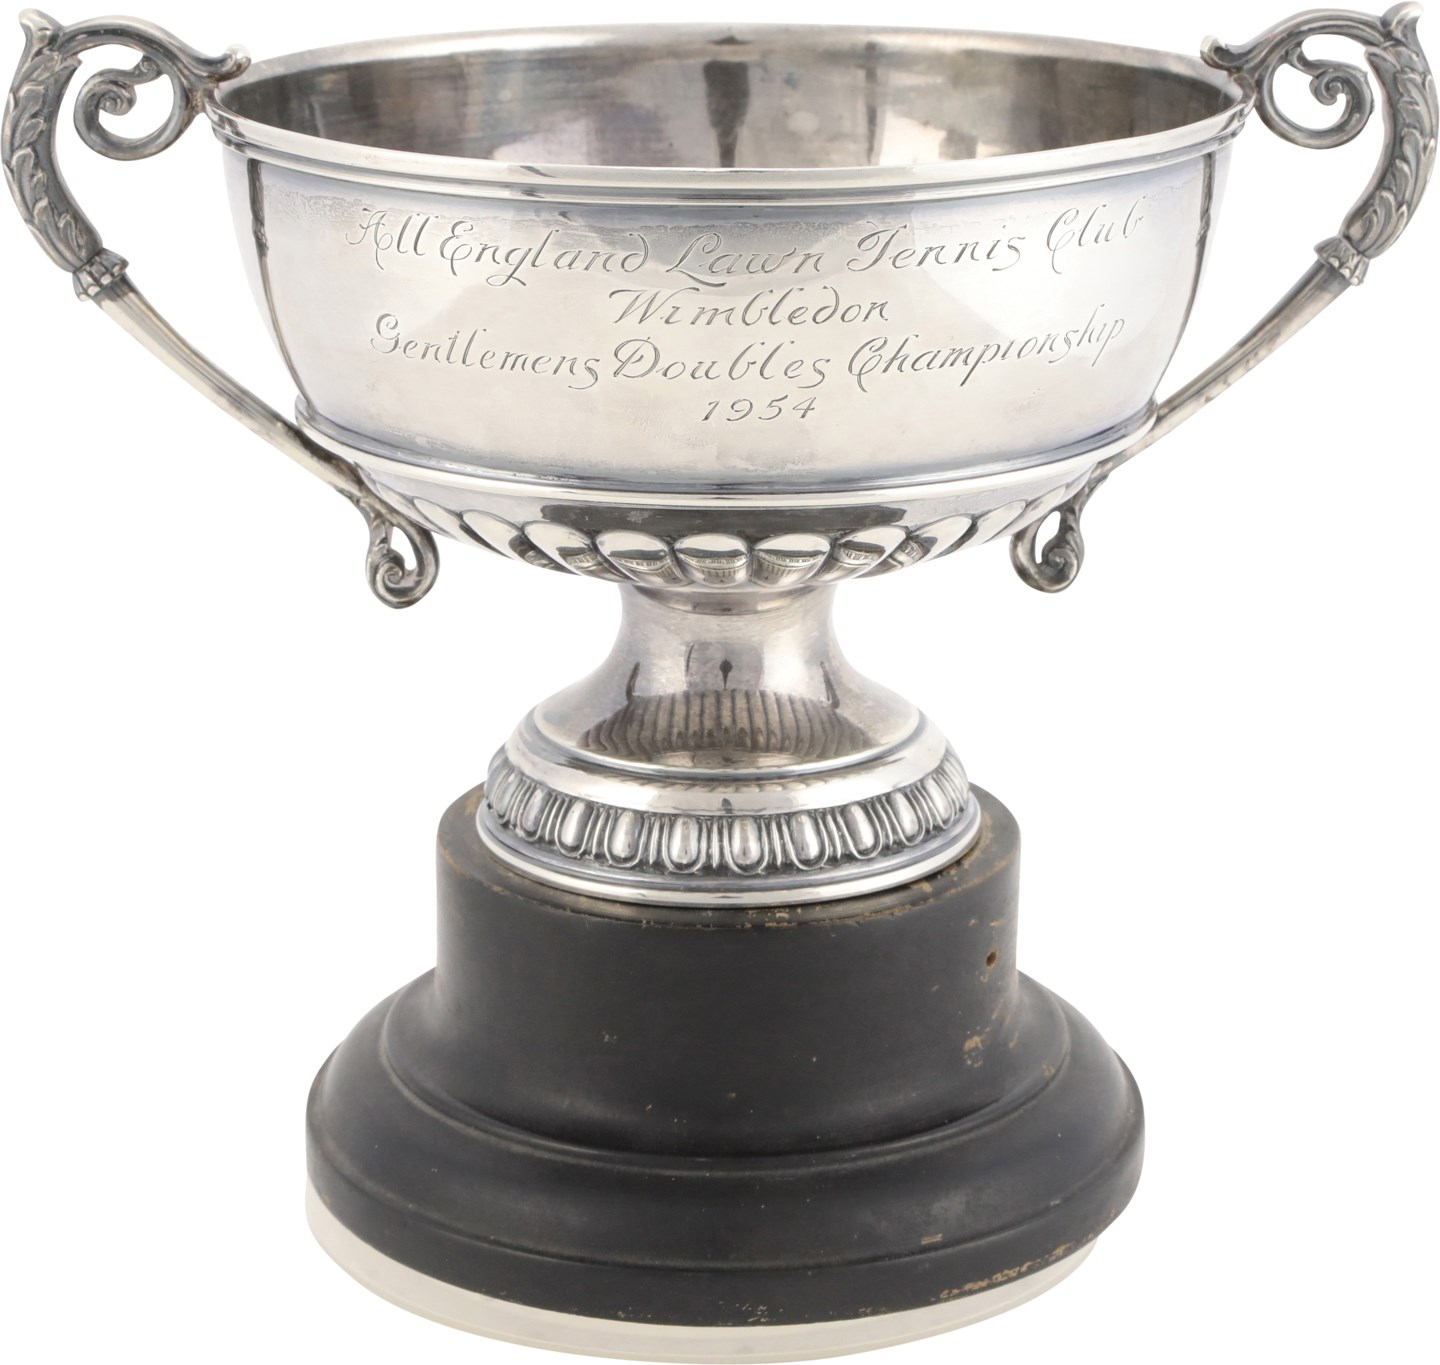 - 1954 Wimbledon Doubles Championship Trophy Presented to Mervyn Rose